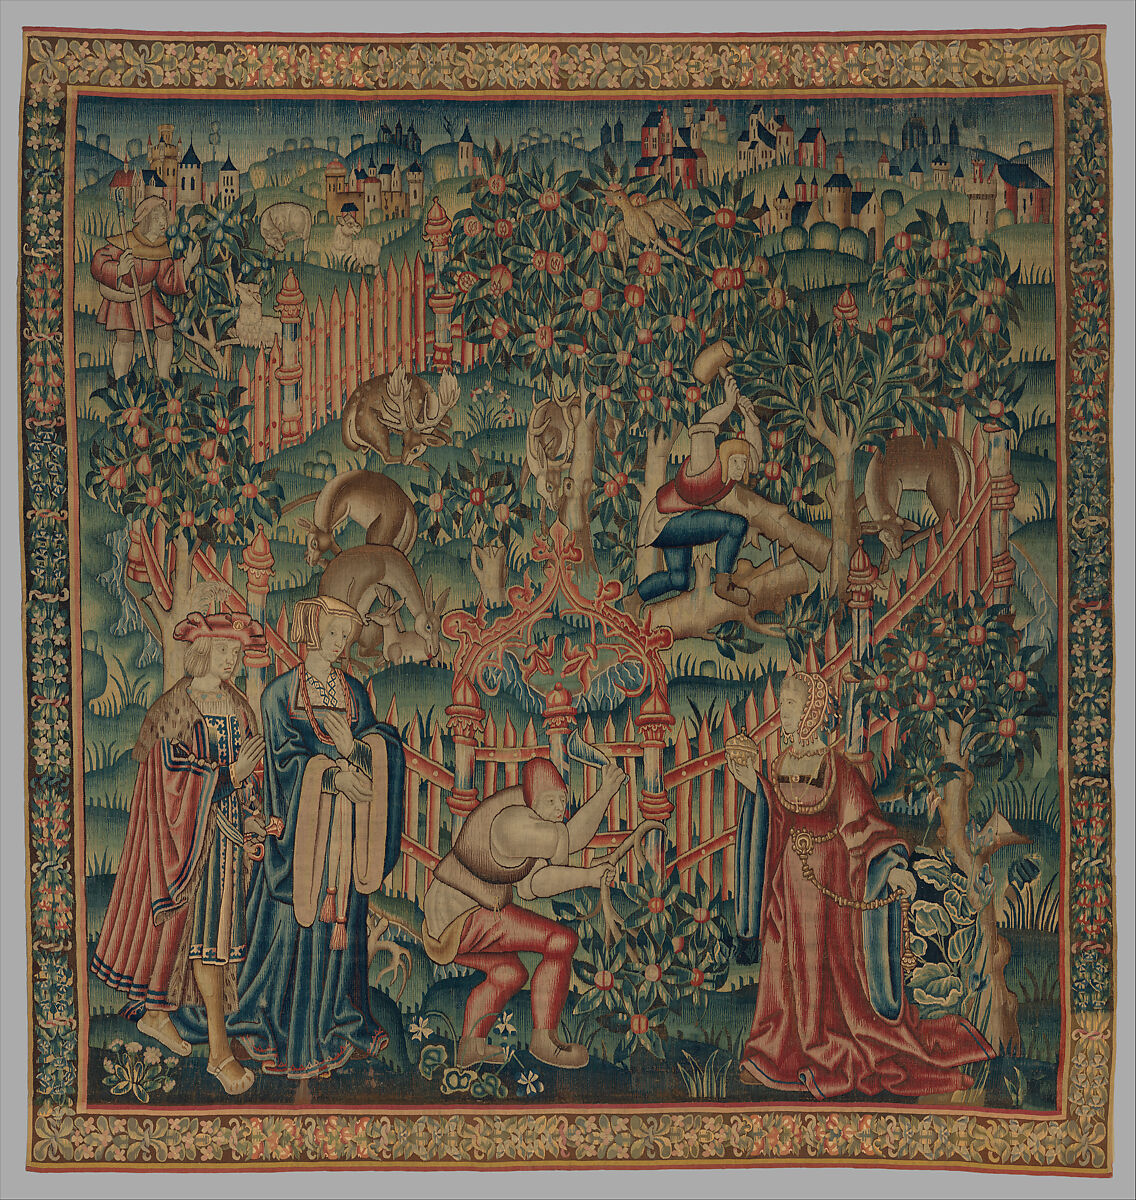 Woodcutters Working at a Deer Park (from the Hunting Parks Tapestries), Wool and silk thread, South Netherlandish 